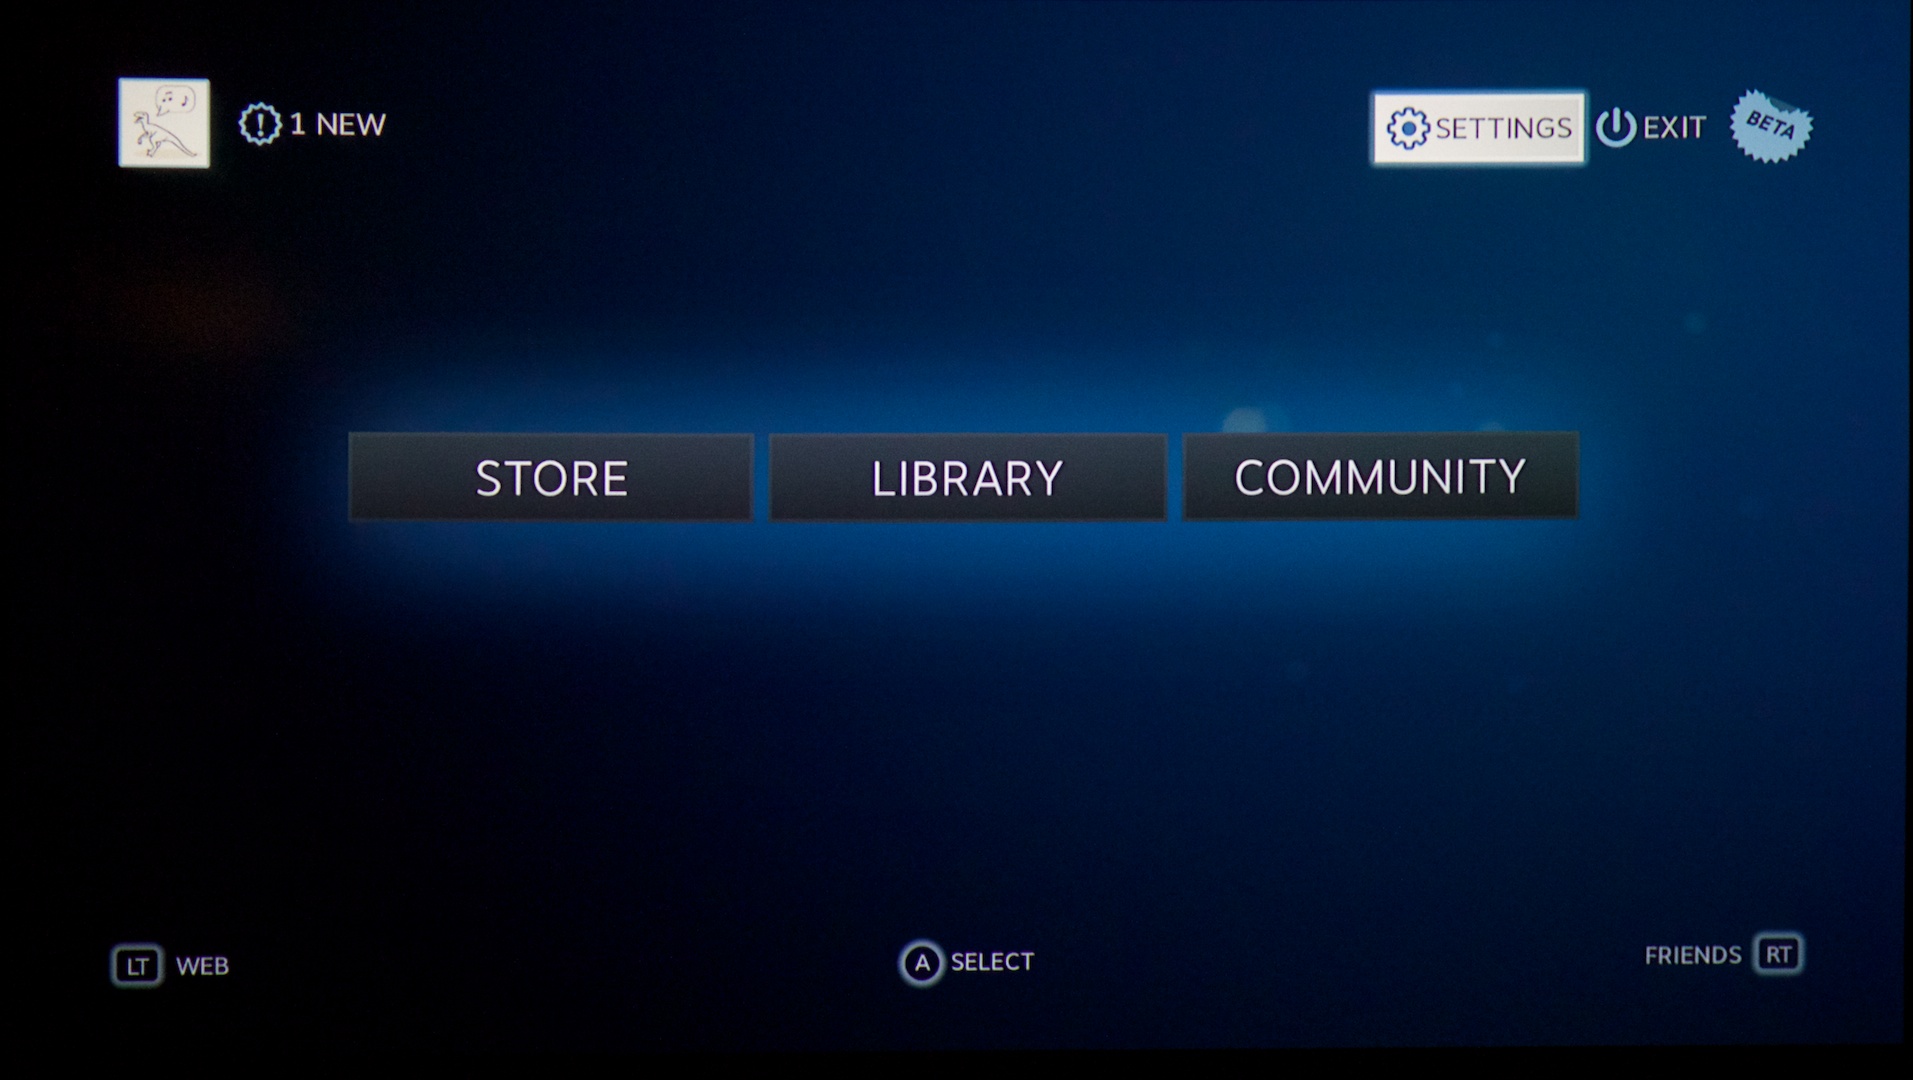 Everything you need to know to install SteamOS on your very own computer